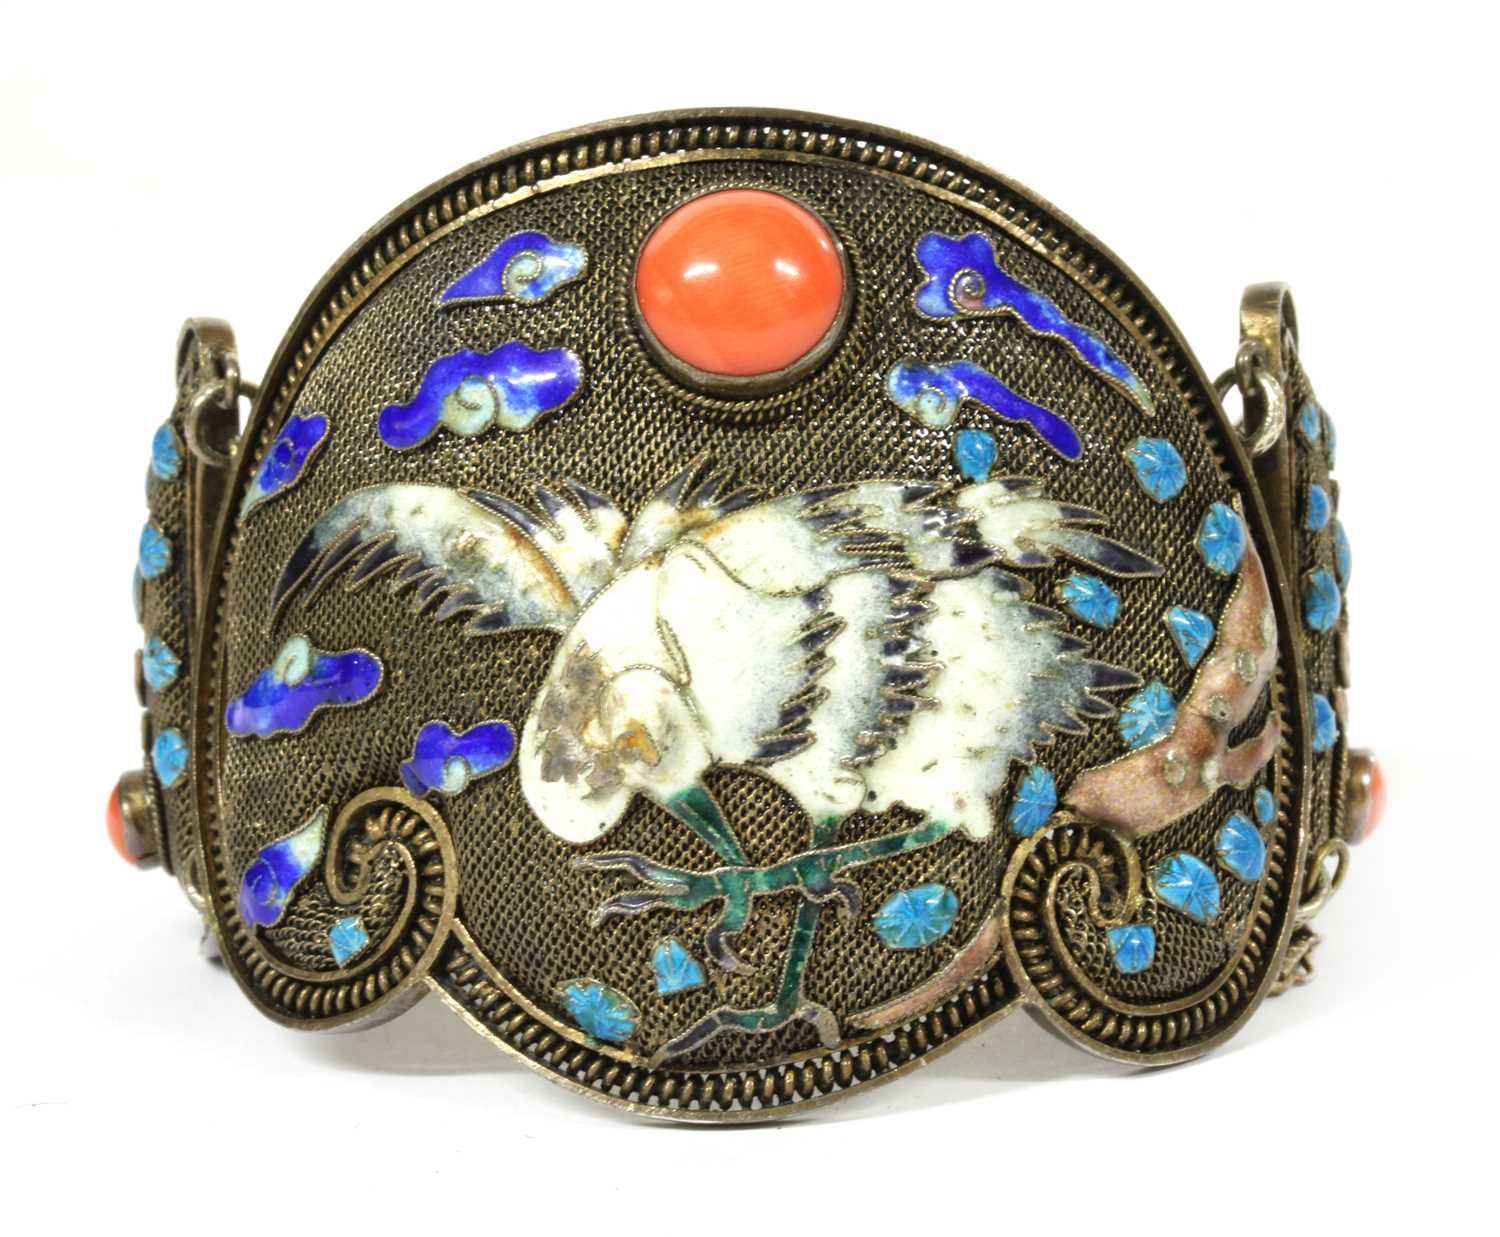 Lot 53 - A Chinese silver gilt coral and enamel hinged bangle, c.1930